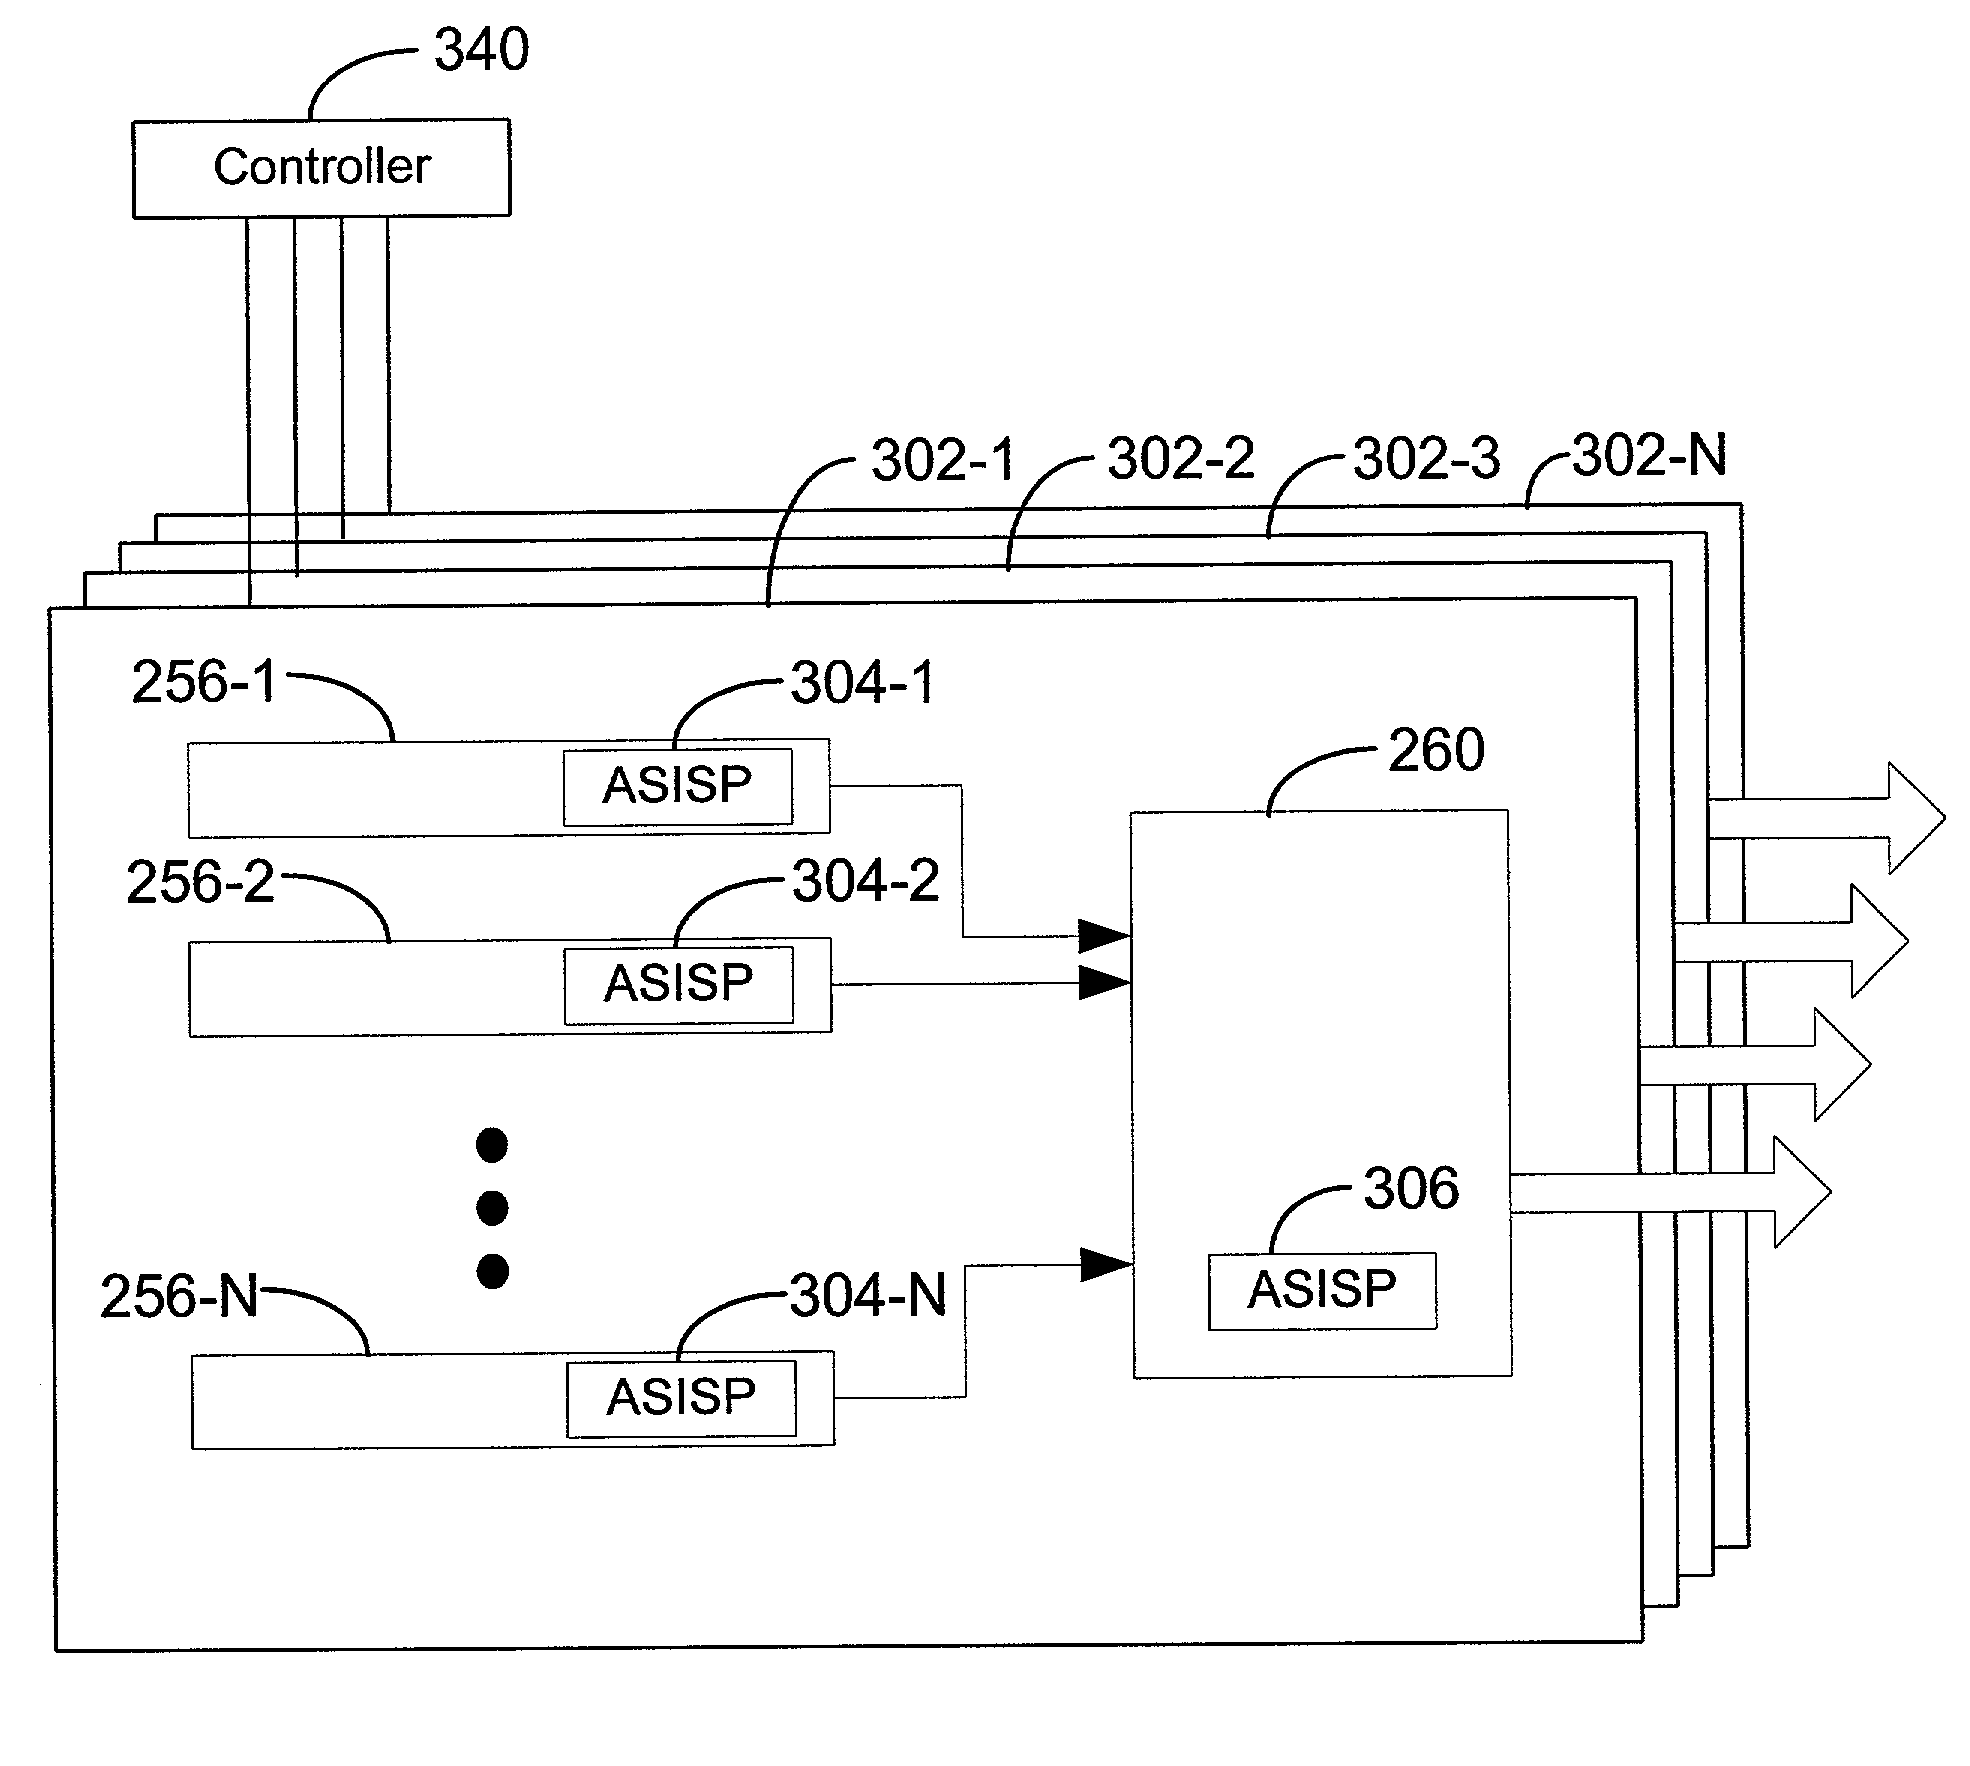 Distributed micro instruction set processor architecture for high-efficiency signal processing